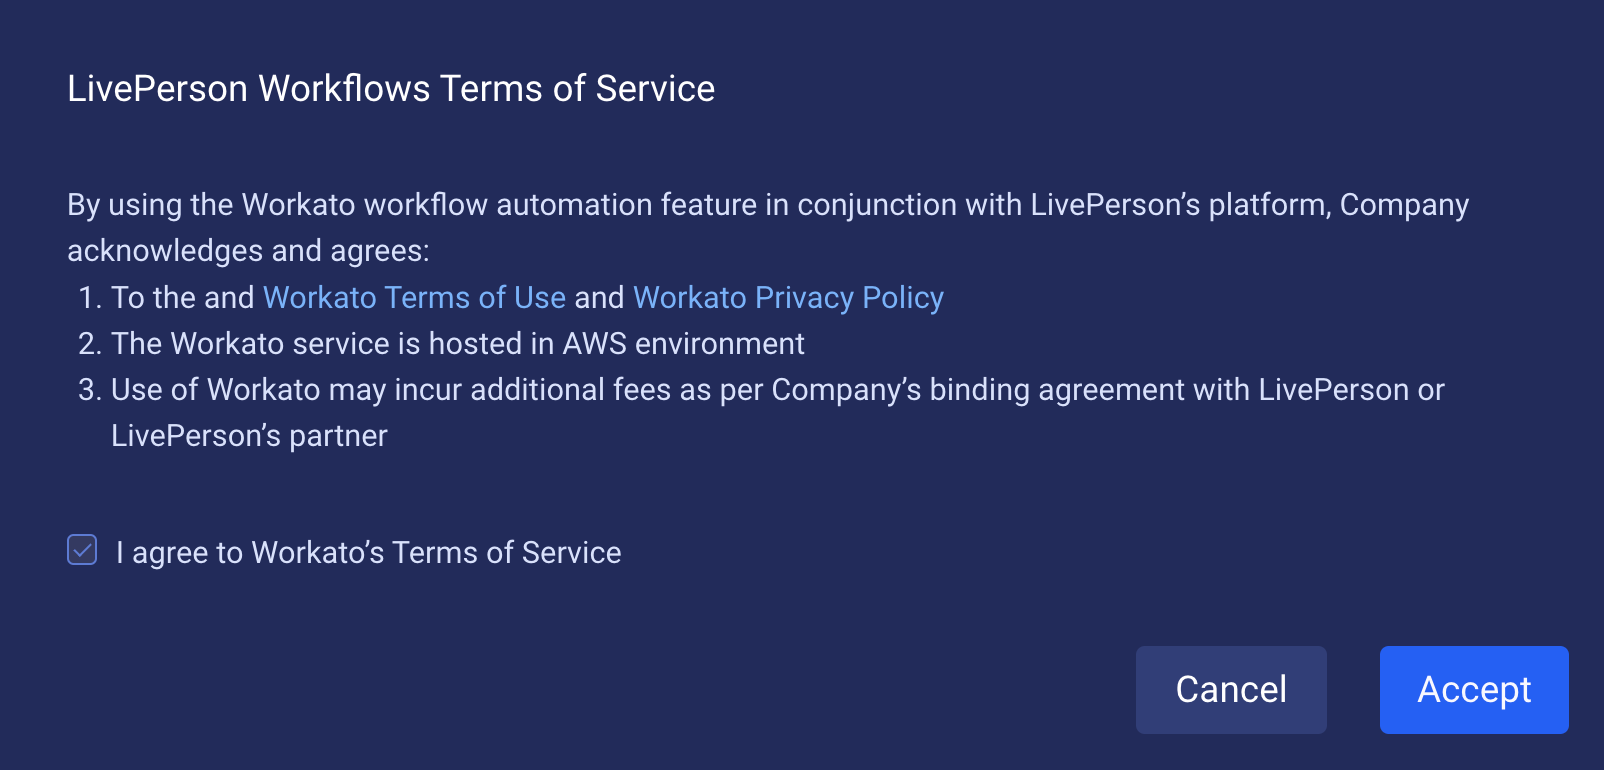 The window on which to review and accept terms